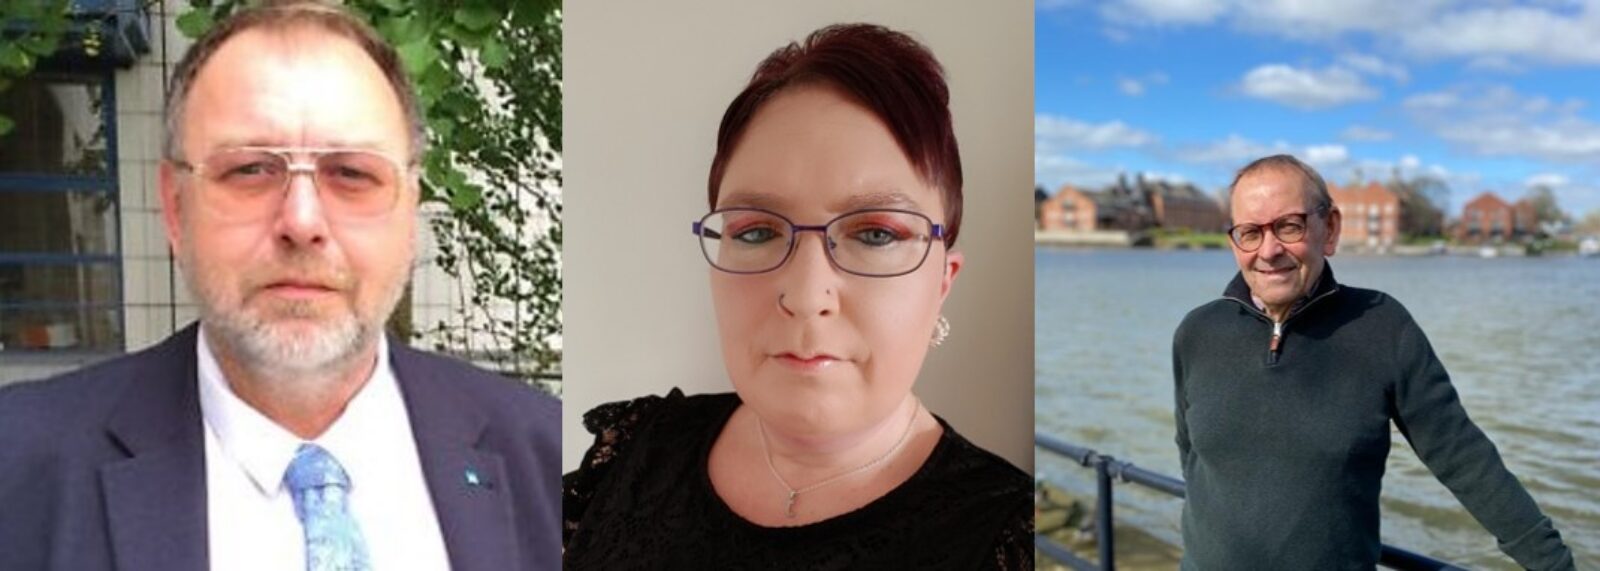 Oulton Broad Labour candidates for East Suffolk District Council